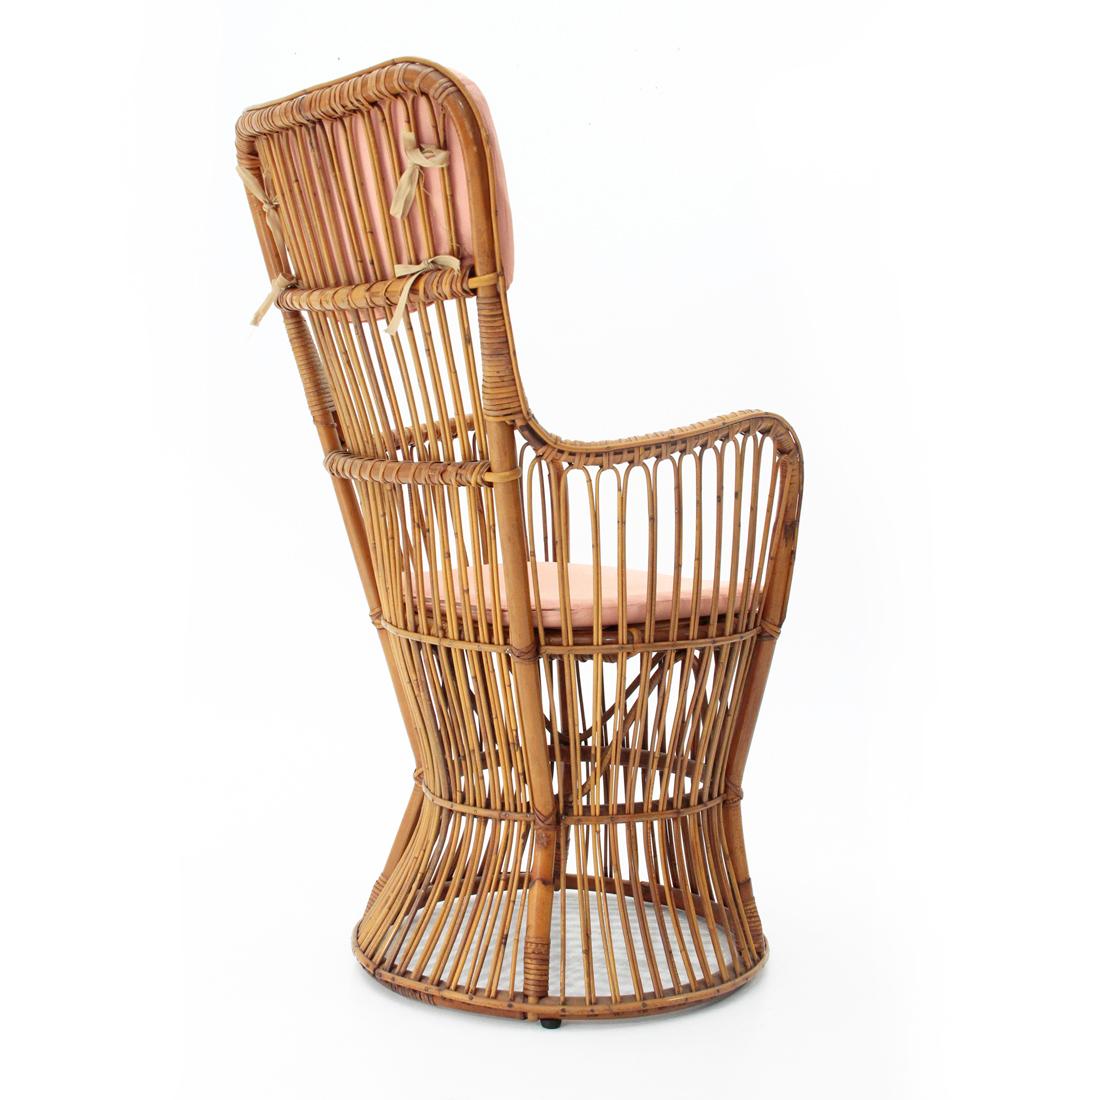 Italian Midcentury Rattan Armchair by Dal Vera, 1950s For Sale 3